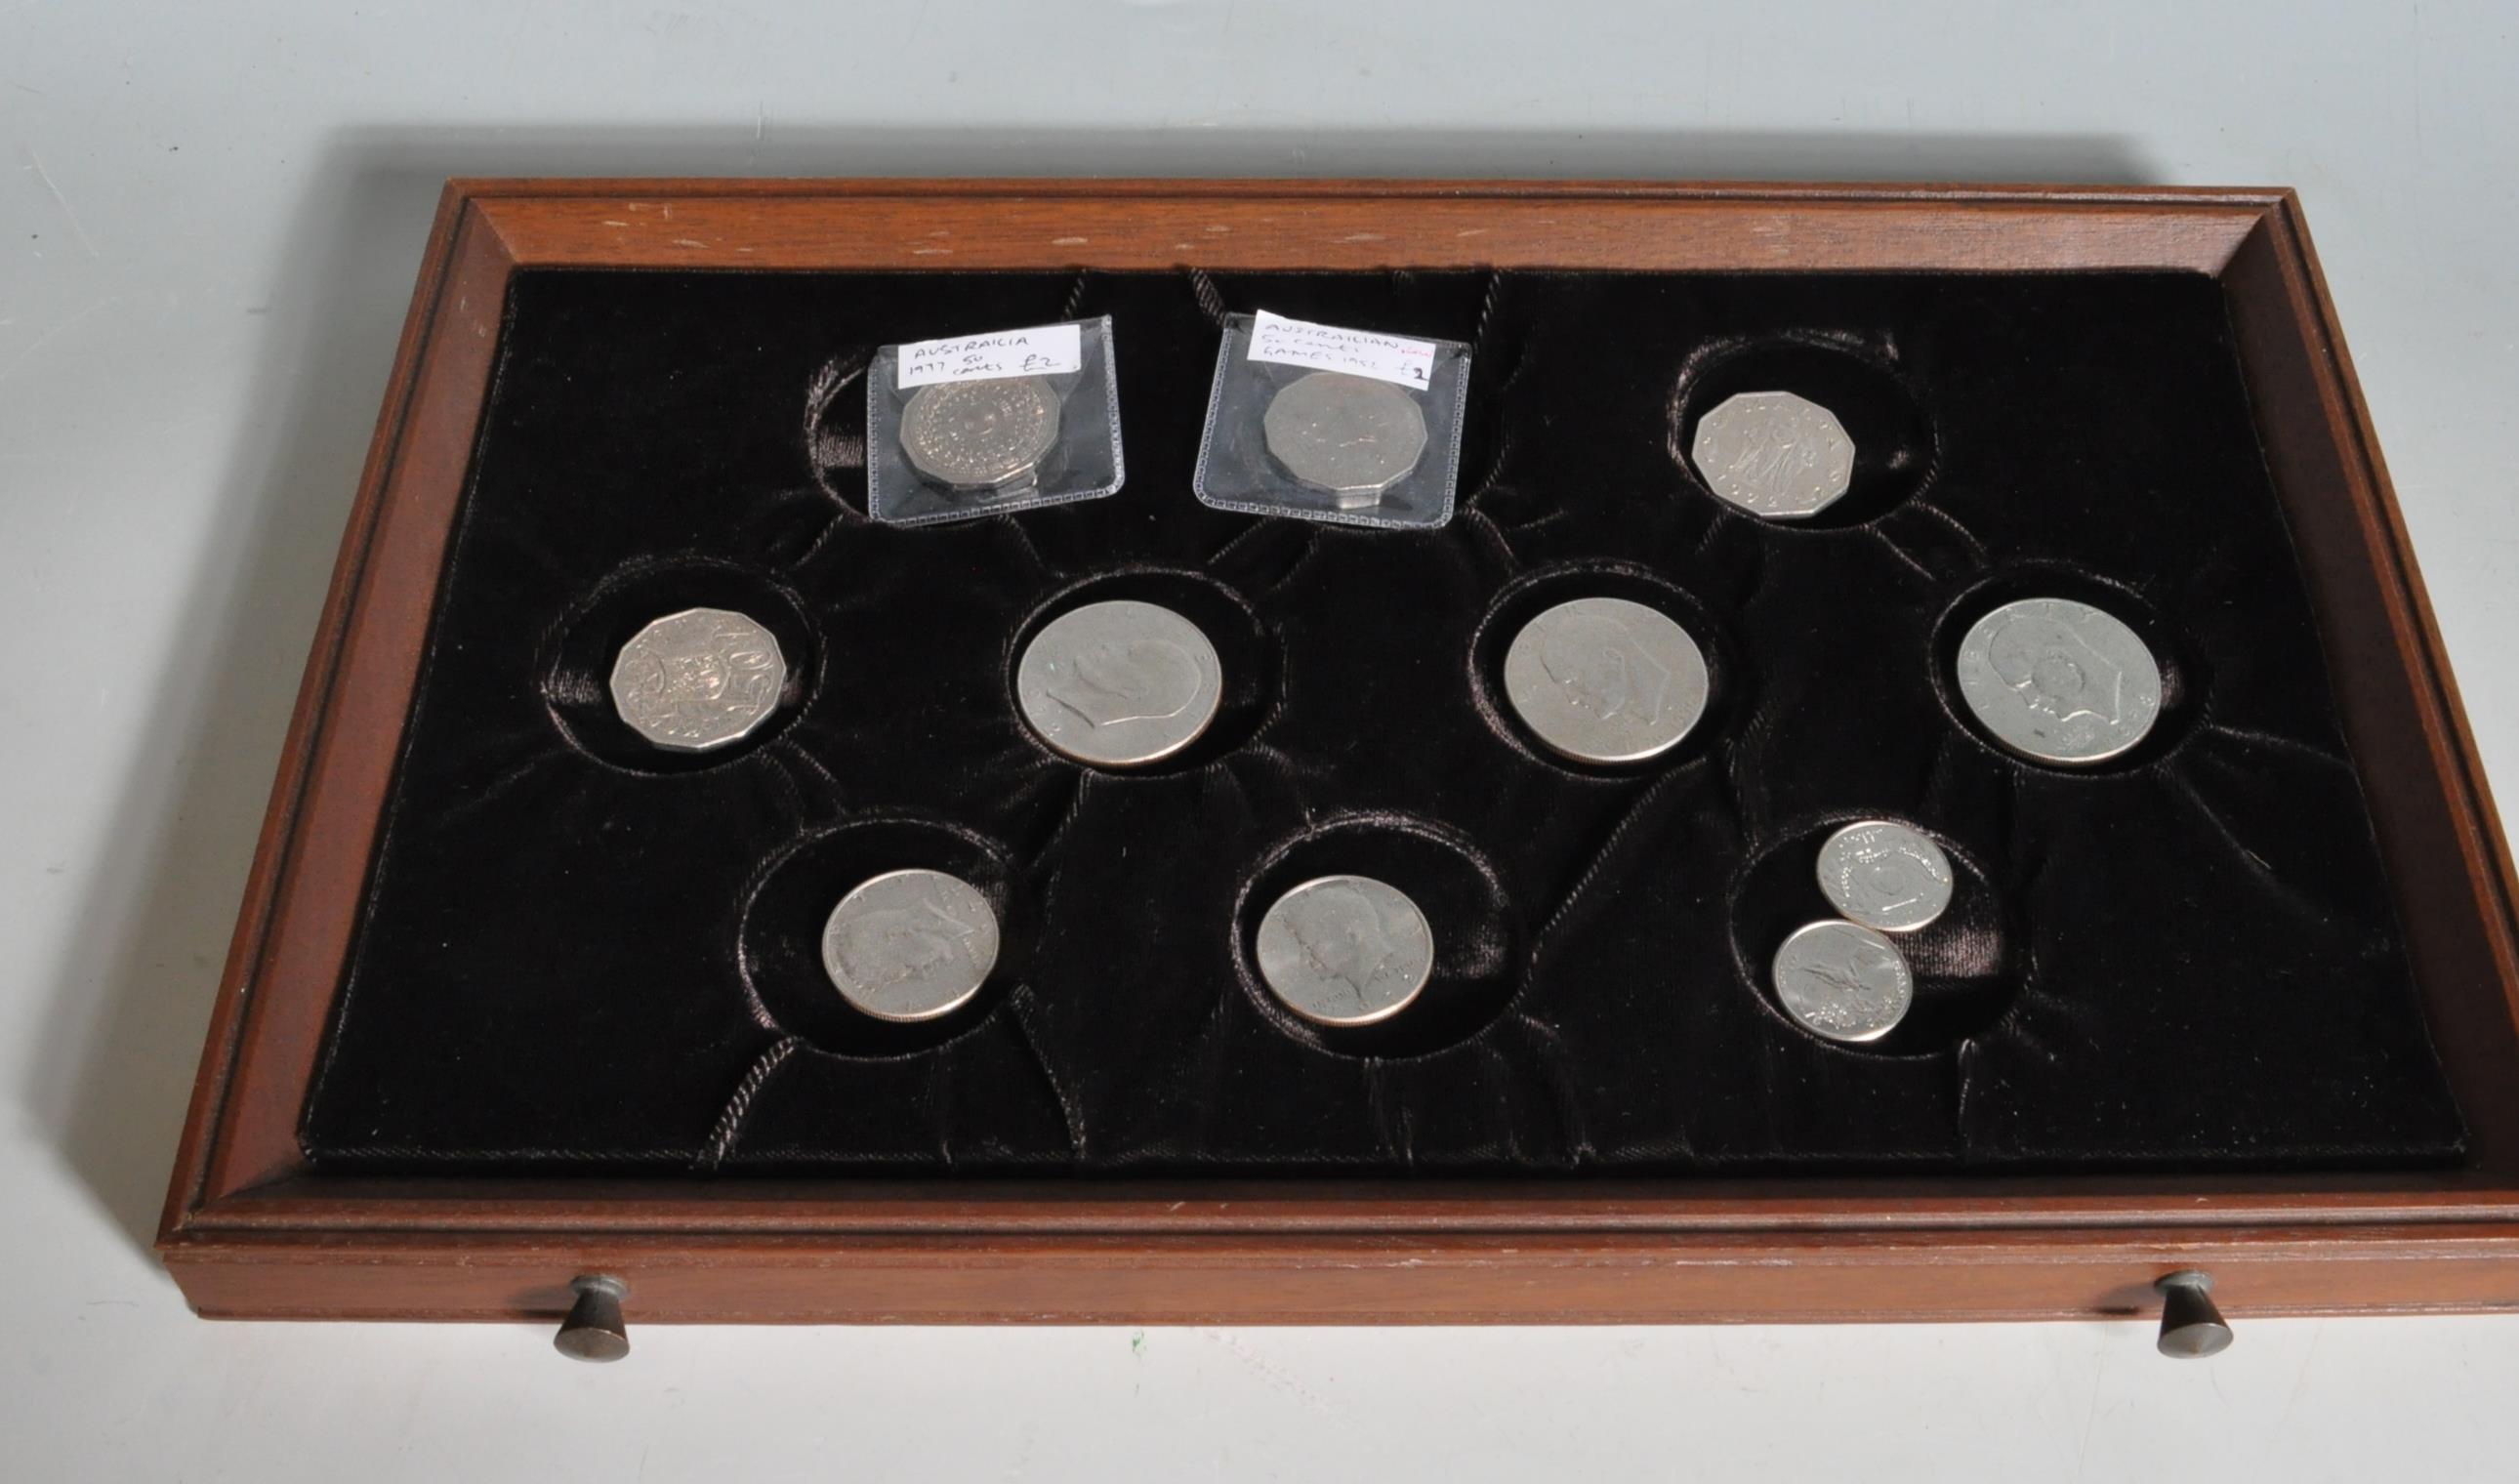 COLLECTION OF COINS AND MEDALS IN A WOODEN BOX - Image 8 of 11